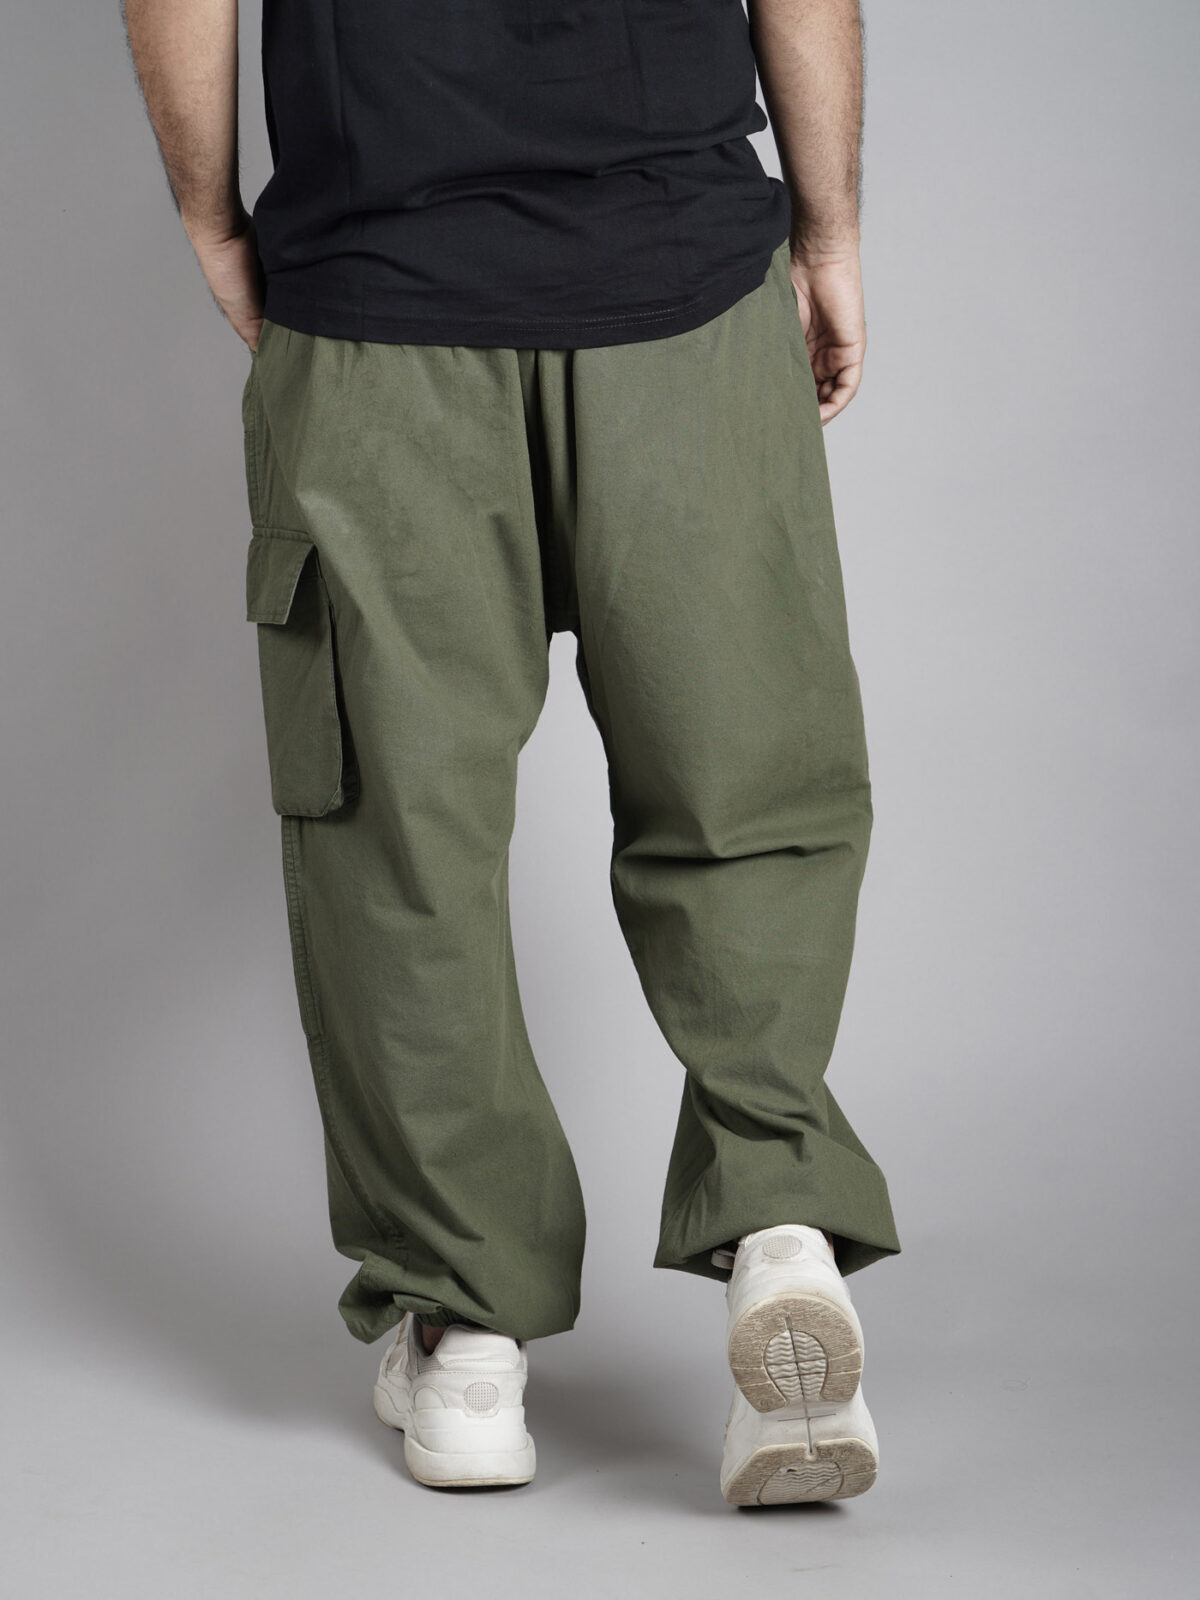 Solid Olive Green Earthy Hoppers – Unisex Pants For Men And Women ...